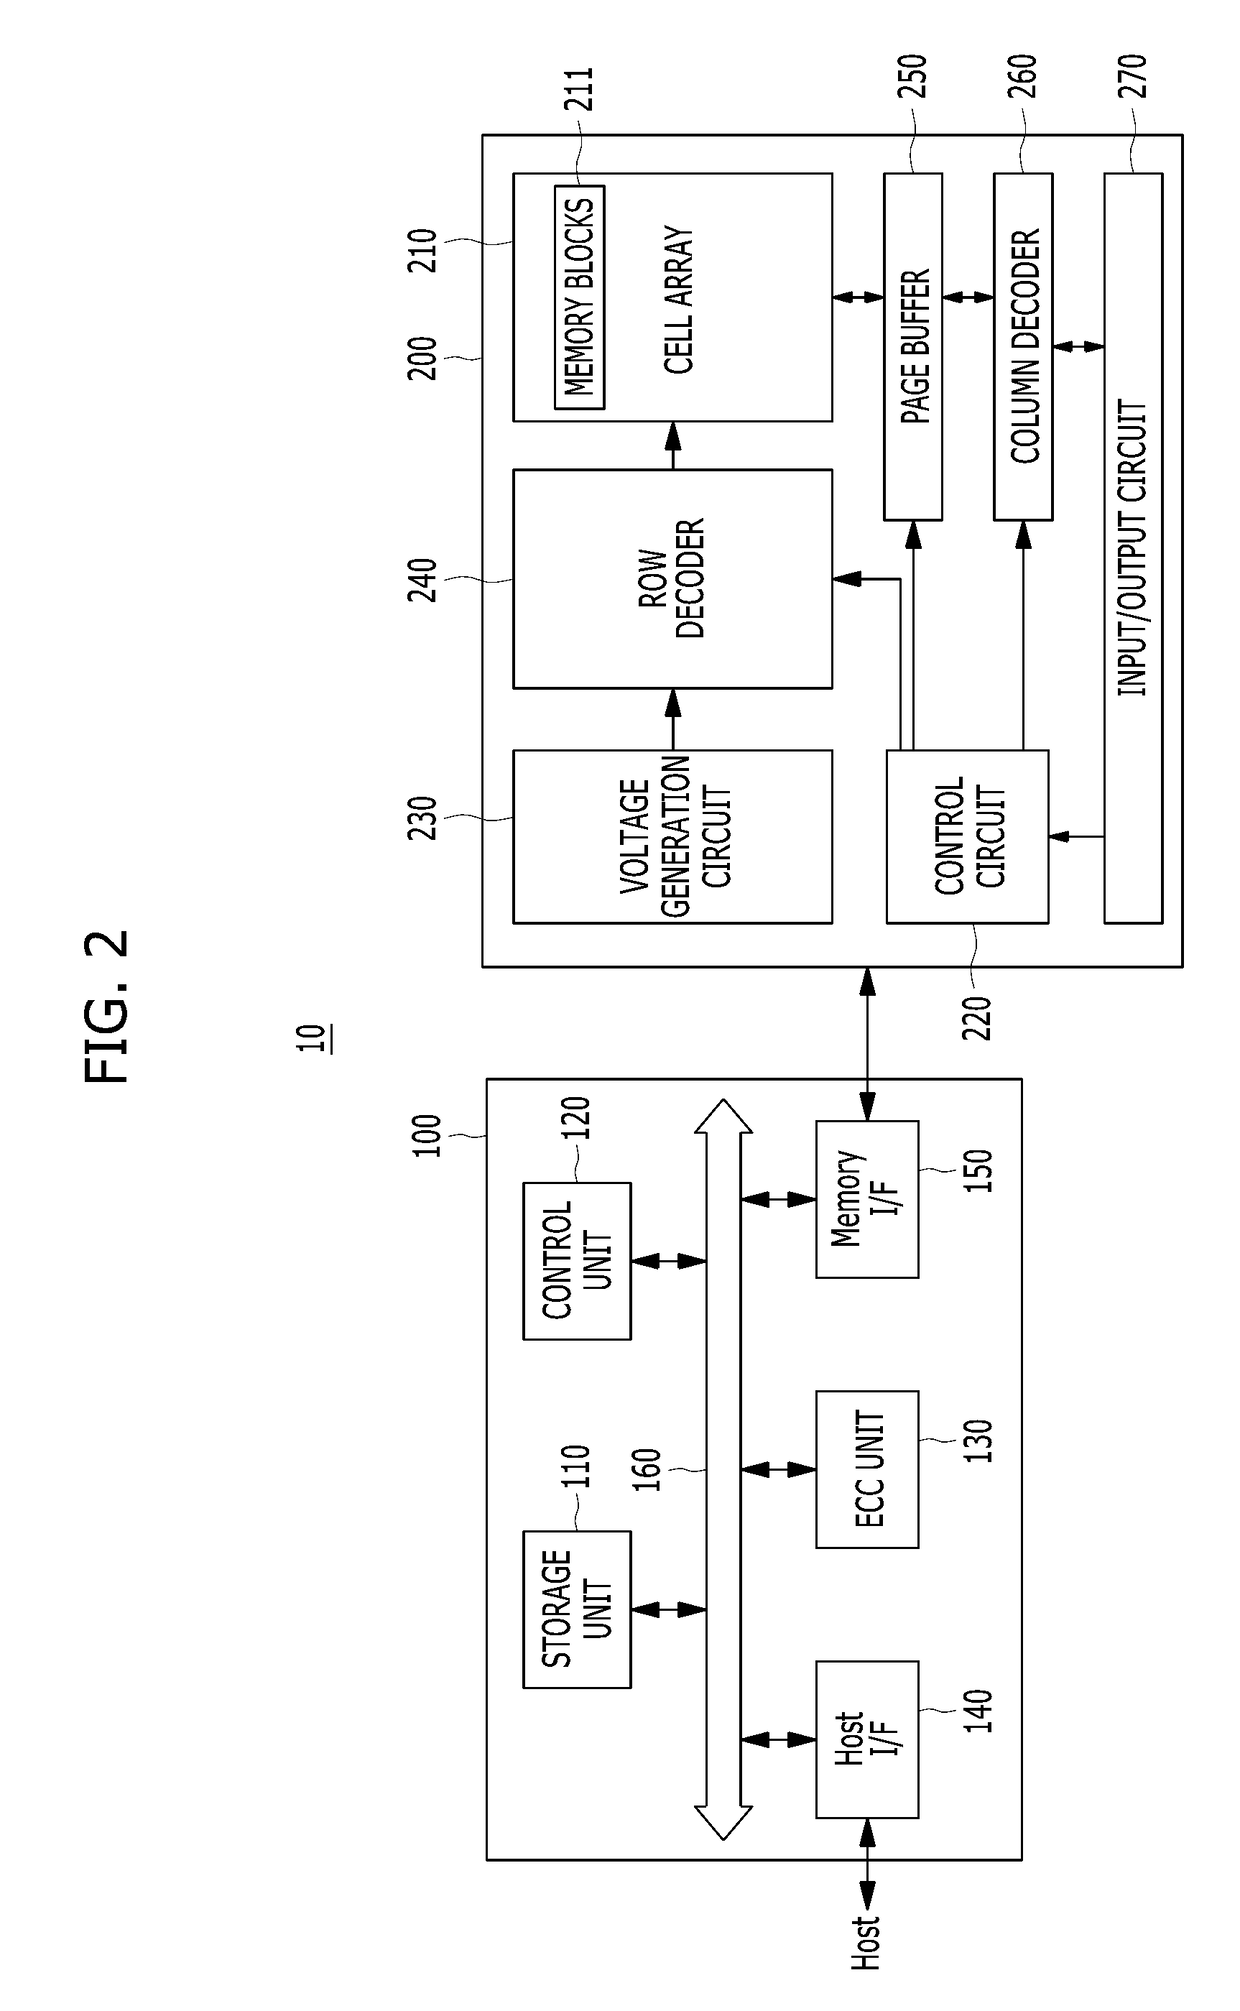 Media quality aware ecc decoding method selection to reduce data access latency